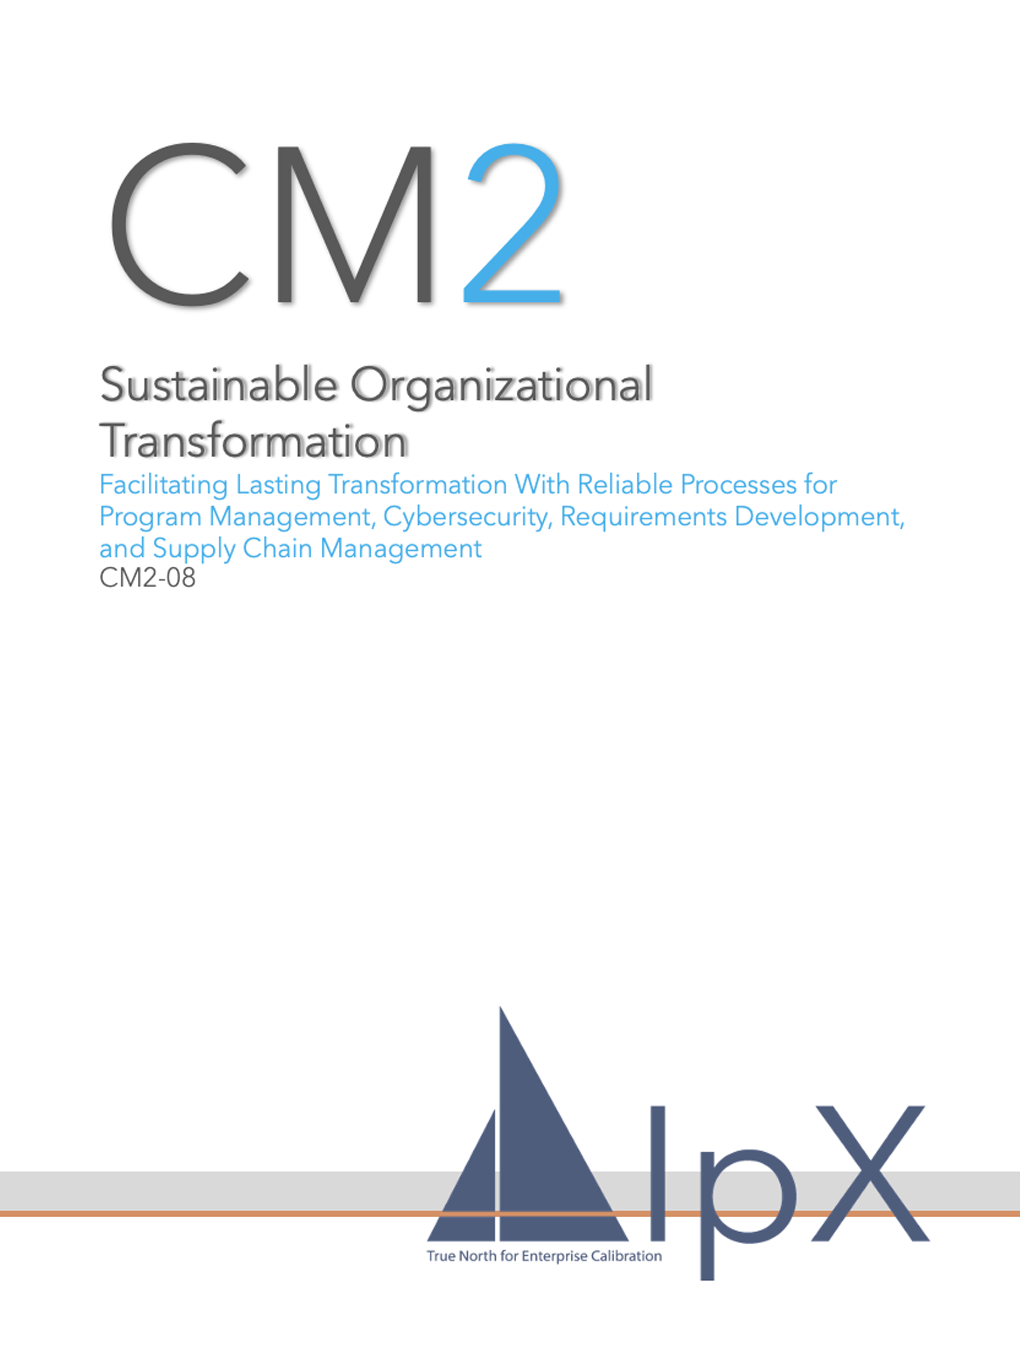 Sustainable Organizational Transformation  Course